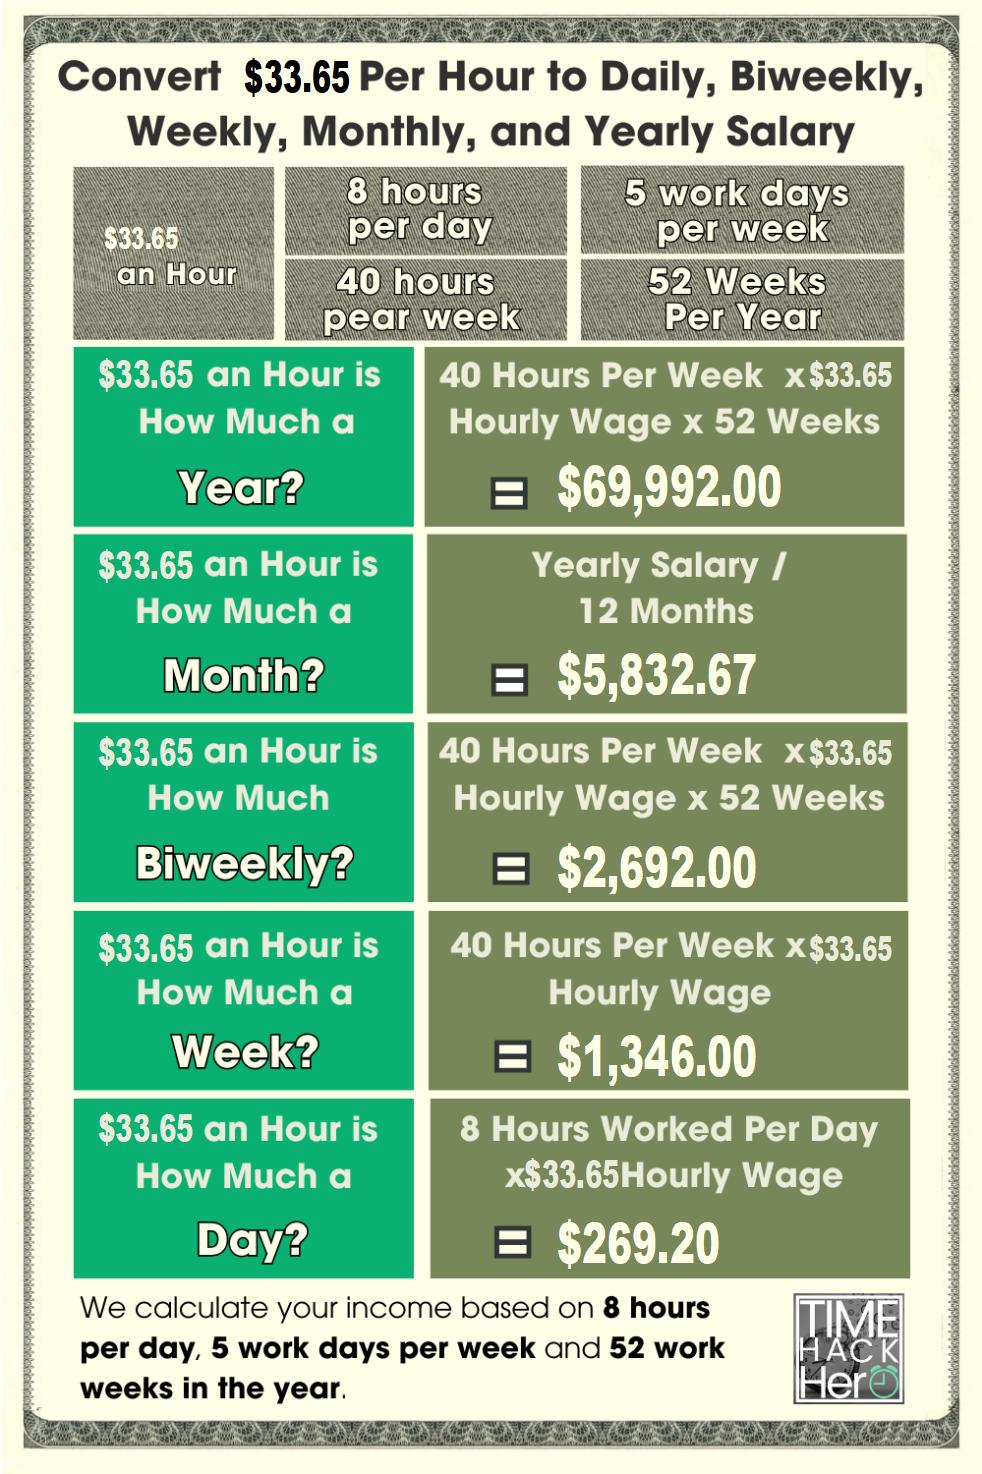 Convert $33.65 Per Hour to Weekly, Monthly, and Yearly Salary